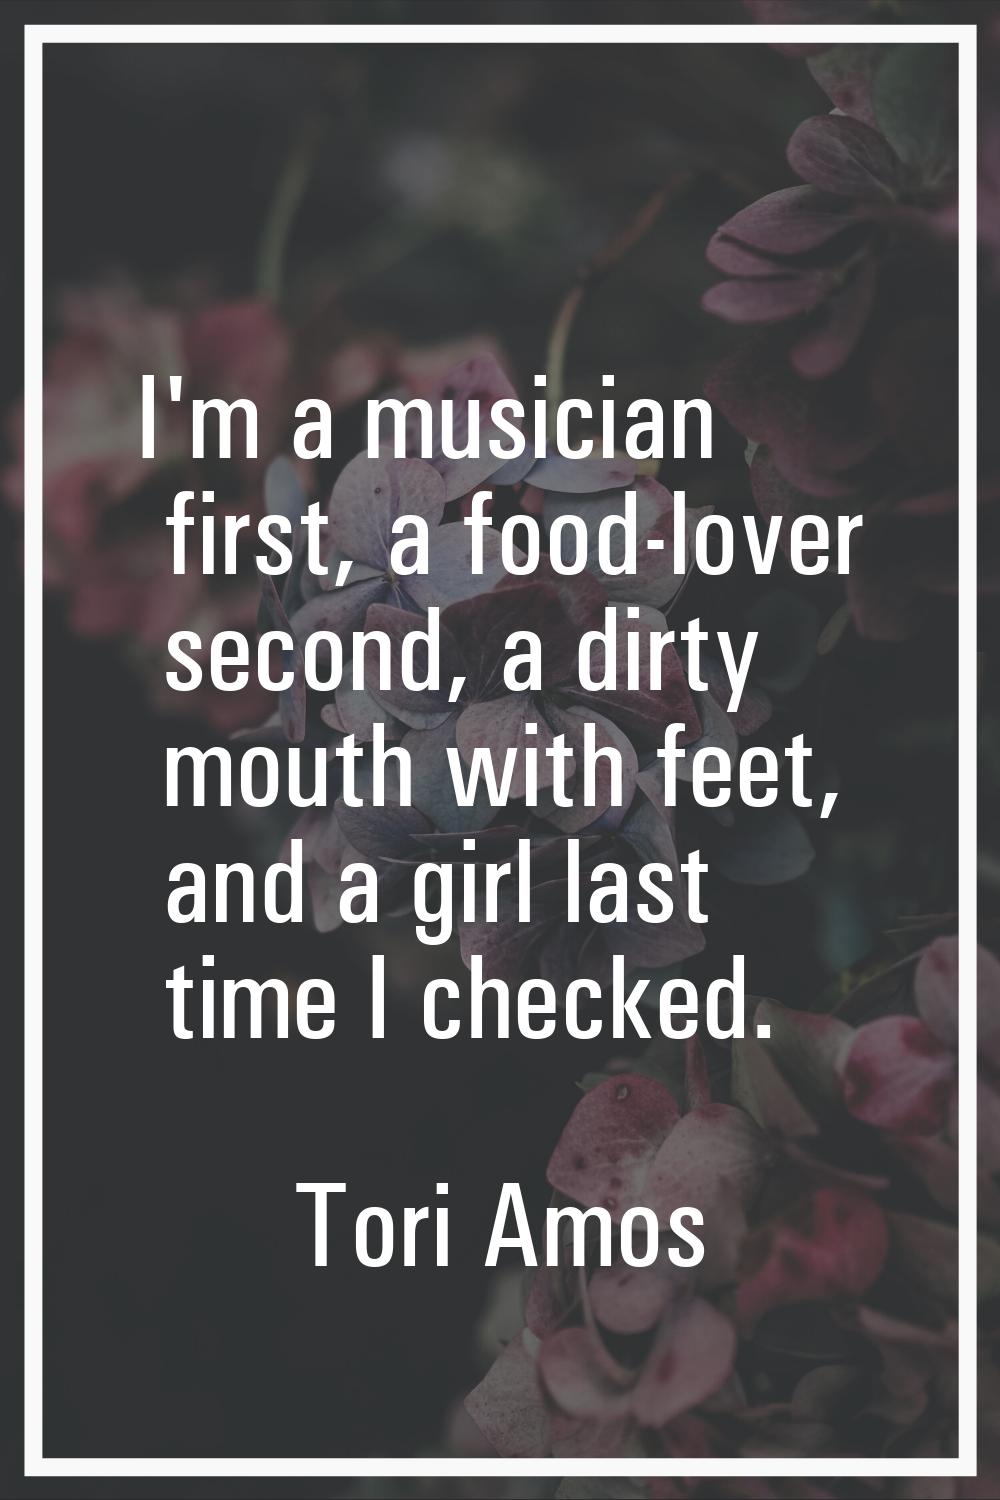 I'm a musician first, a food-lover second, a dirty mouth with feet, and a girl last time I checked.